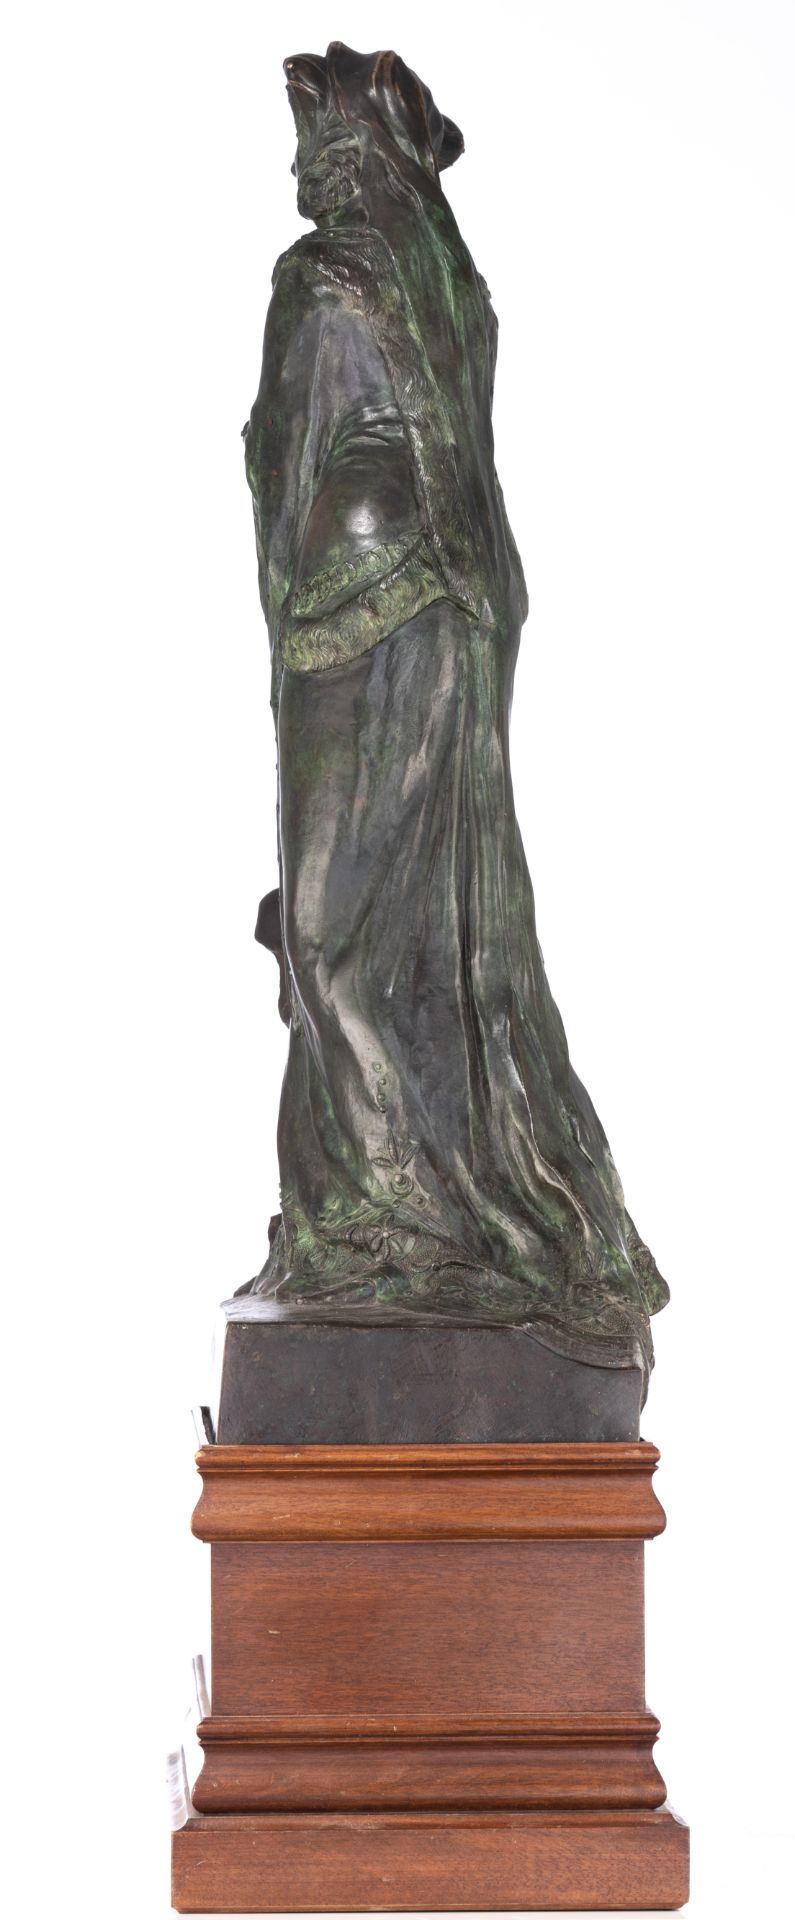 Constant M., motherly love, green patinated bronze on a walnut base, H 81,5 - 106 cm (without - with - Image 2 of 11